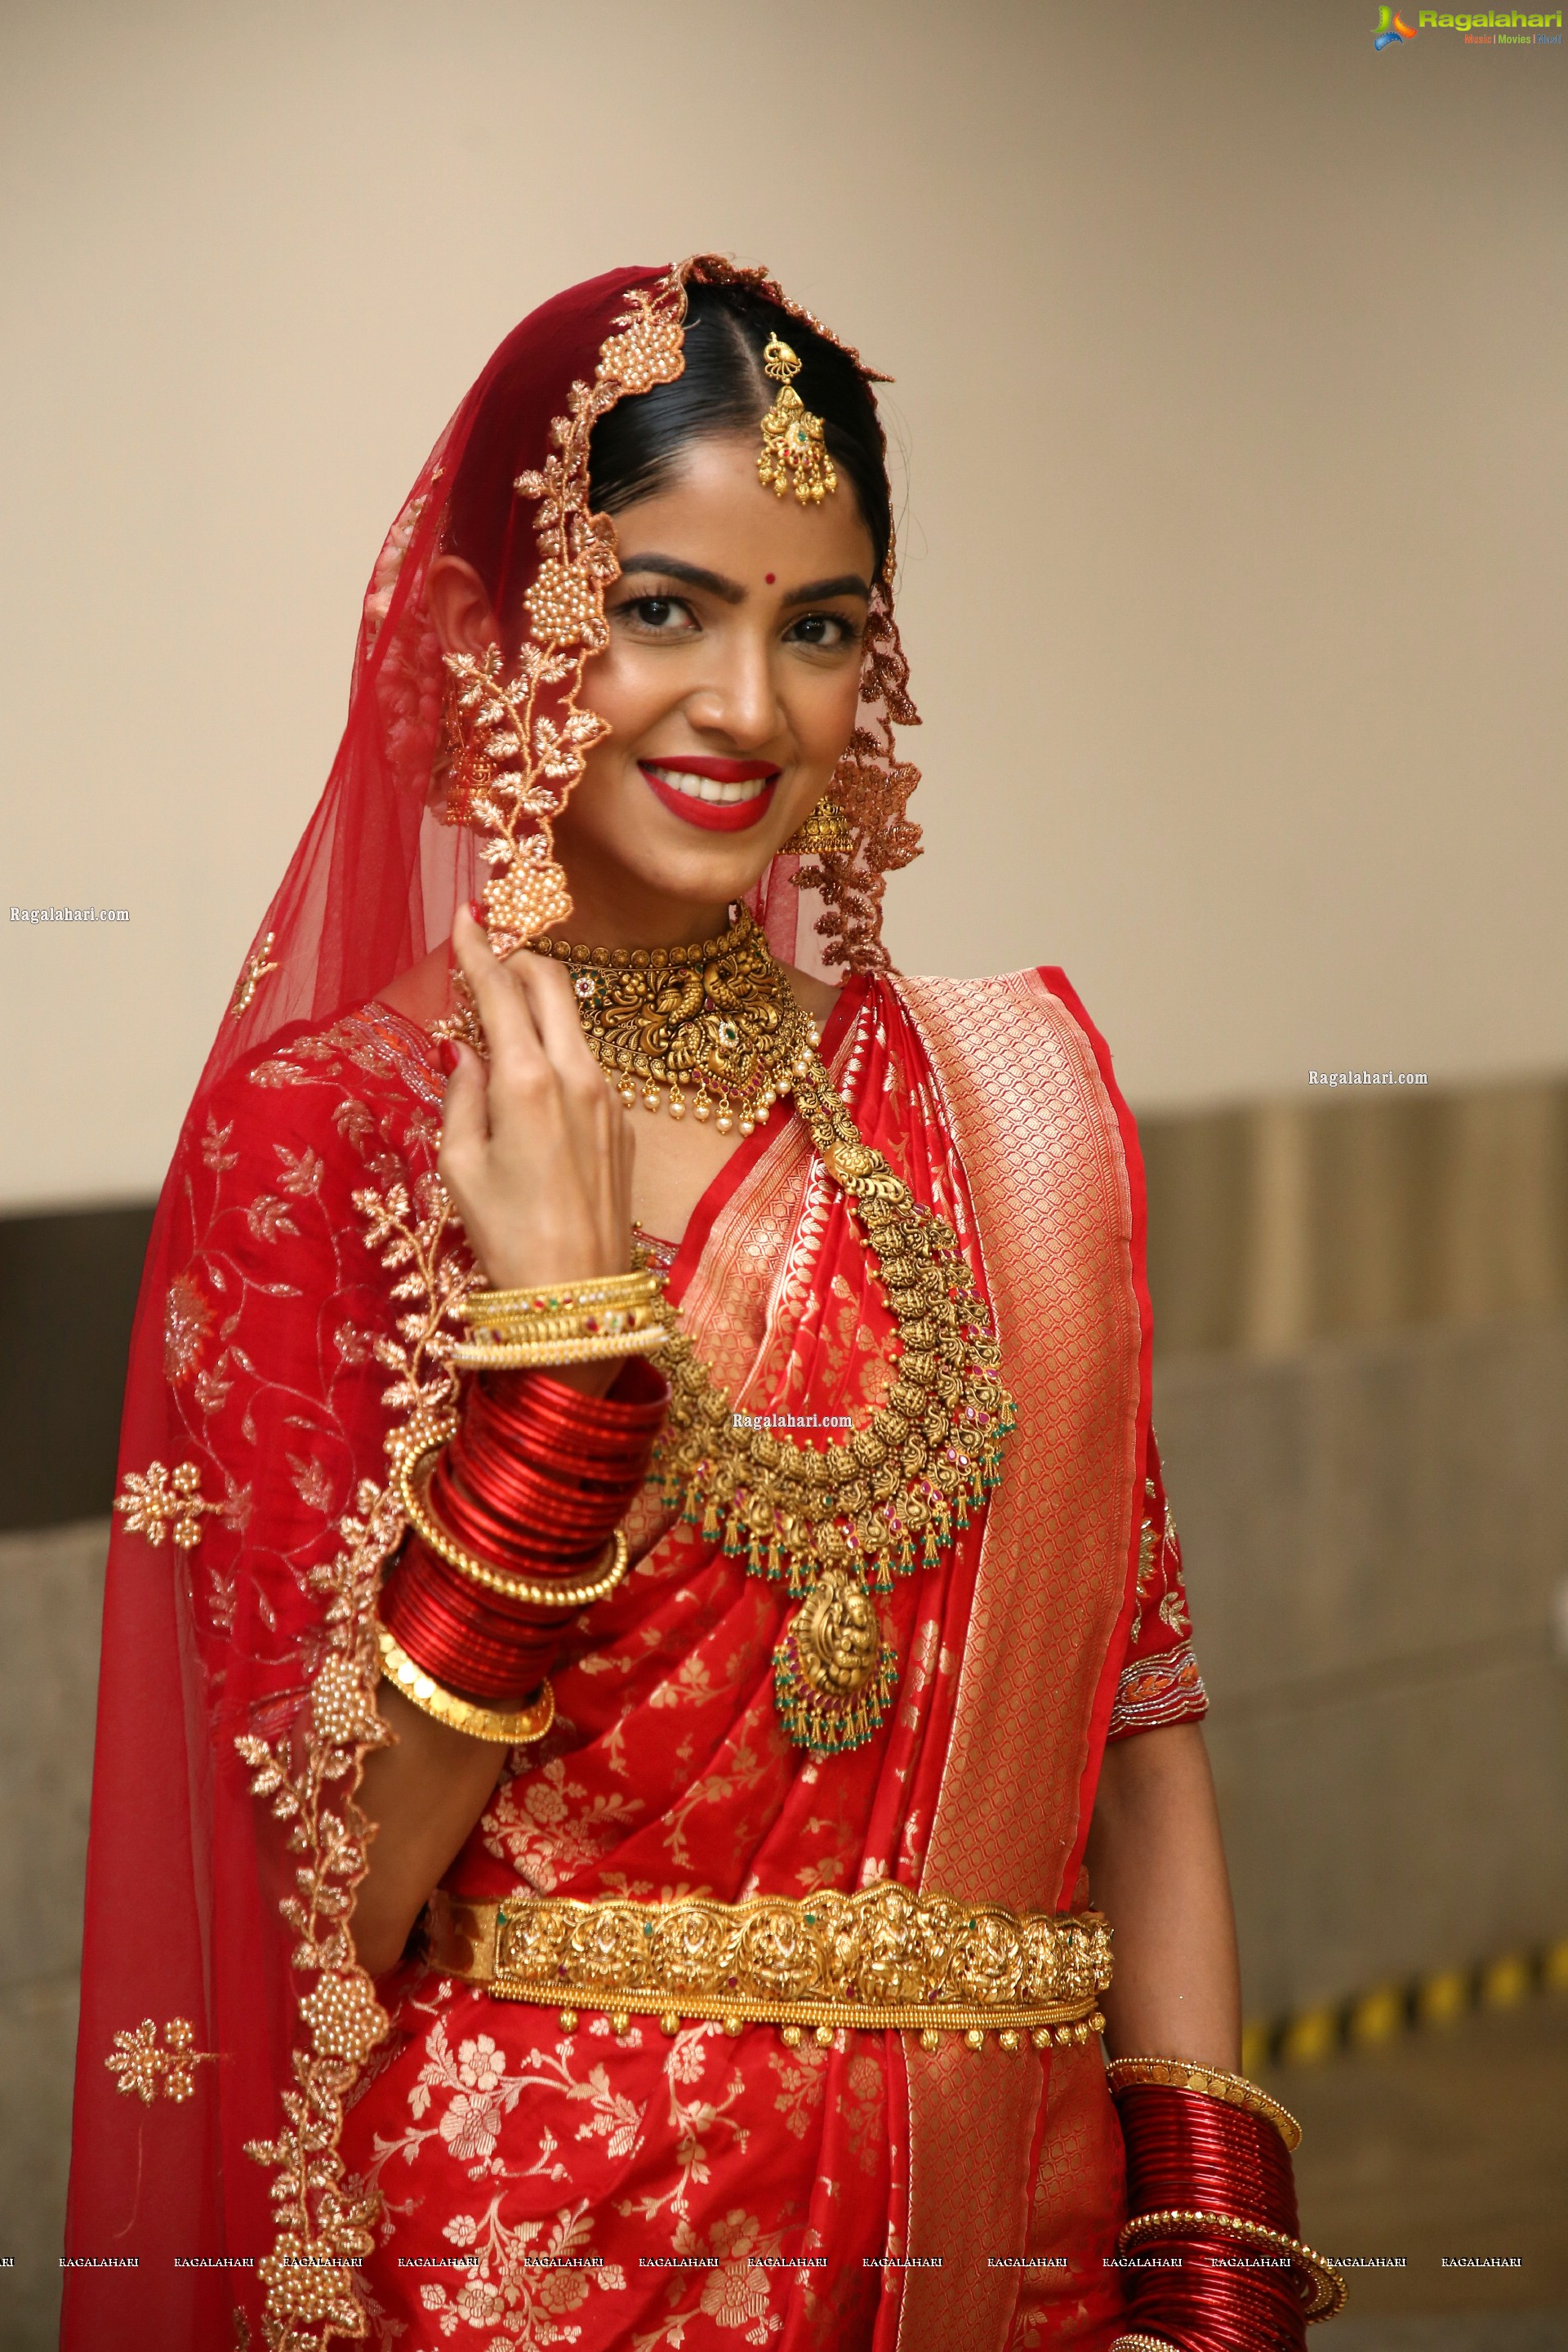 Drishika Chander in Bridal Red and Stunning Ornaments, HD Photo Gallery